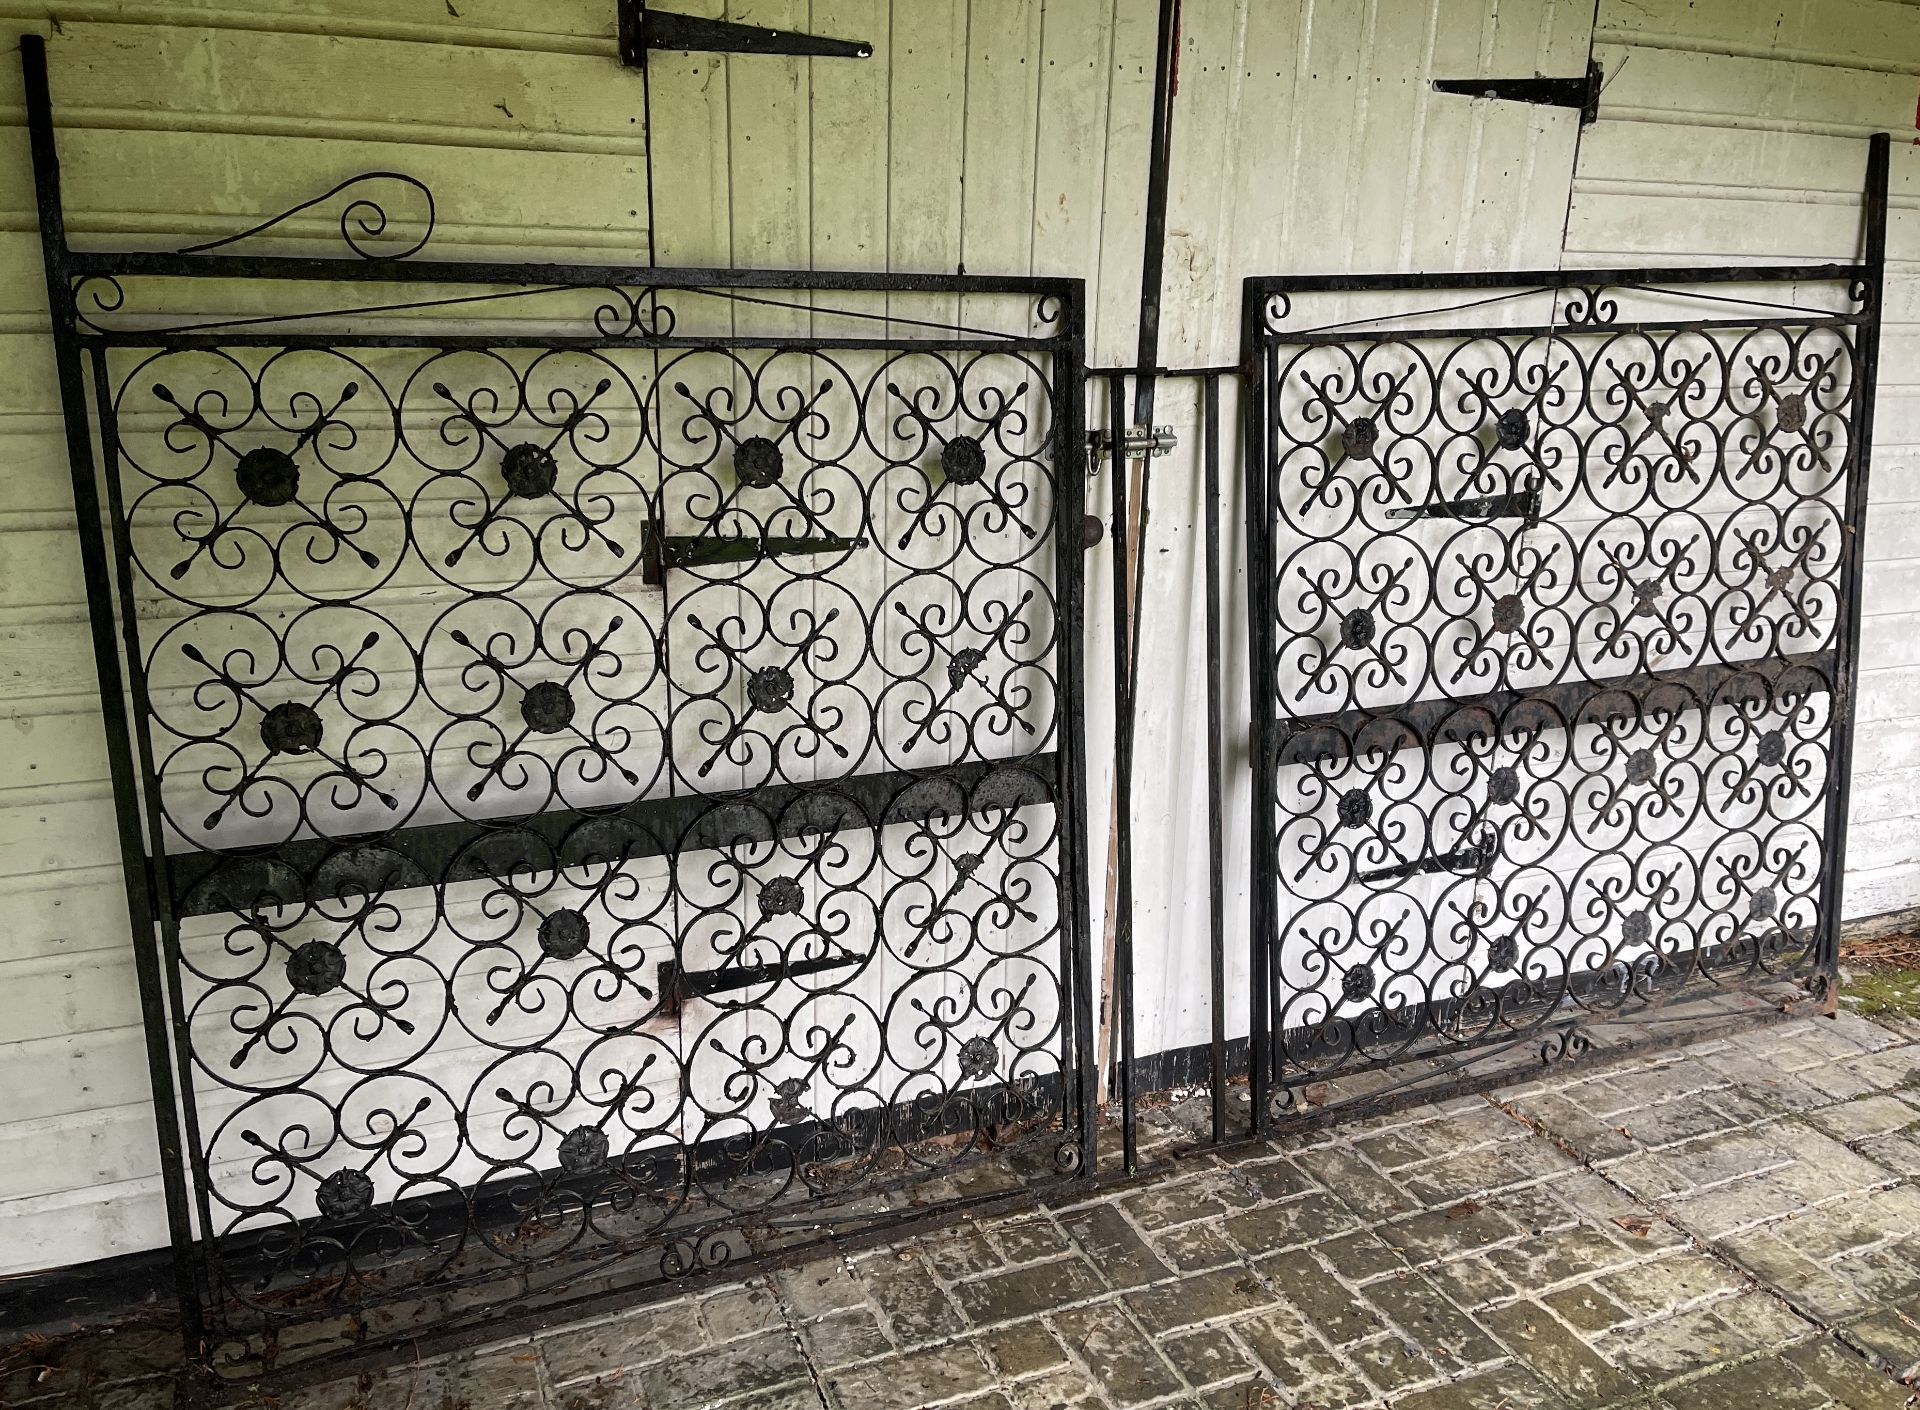 ORIGINAL LARGE IRON ENTRY GATES TO ESATE FROM 1930